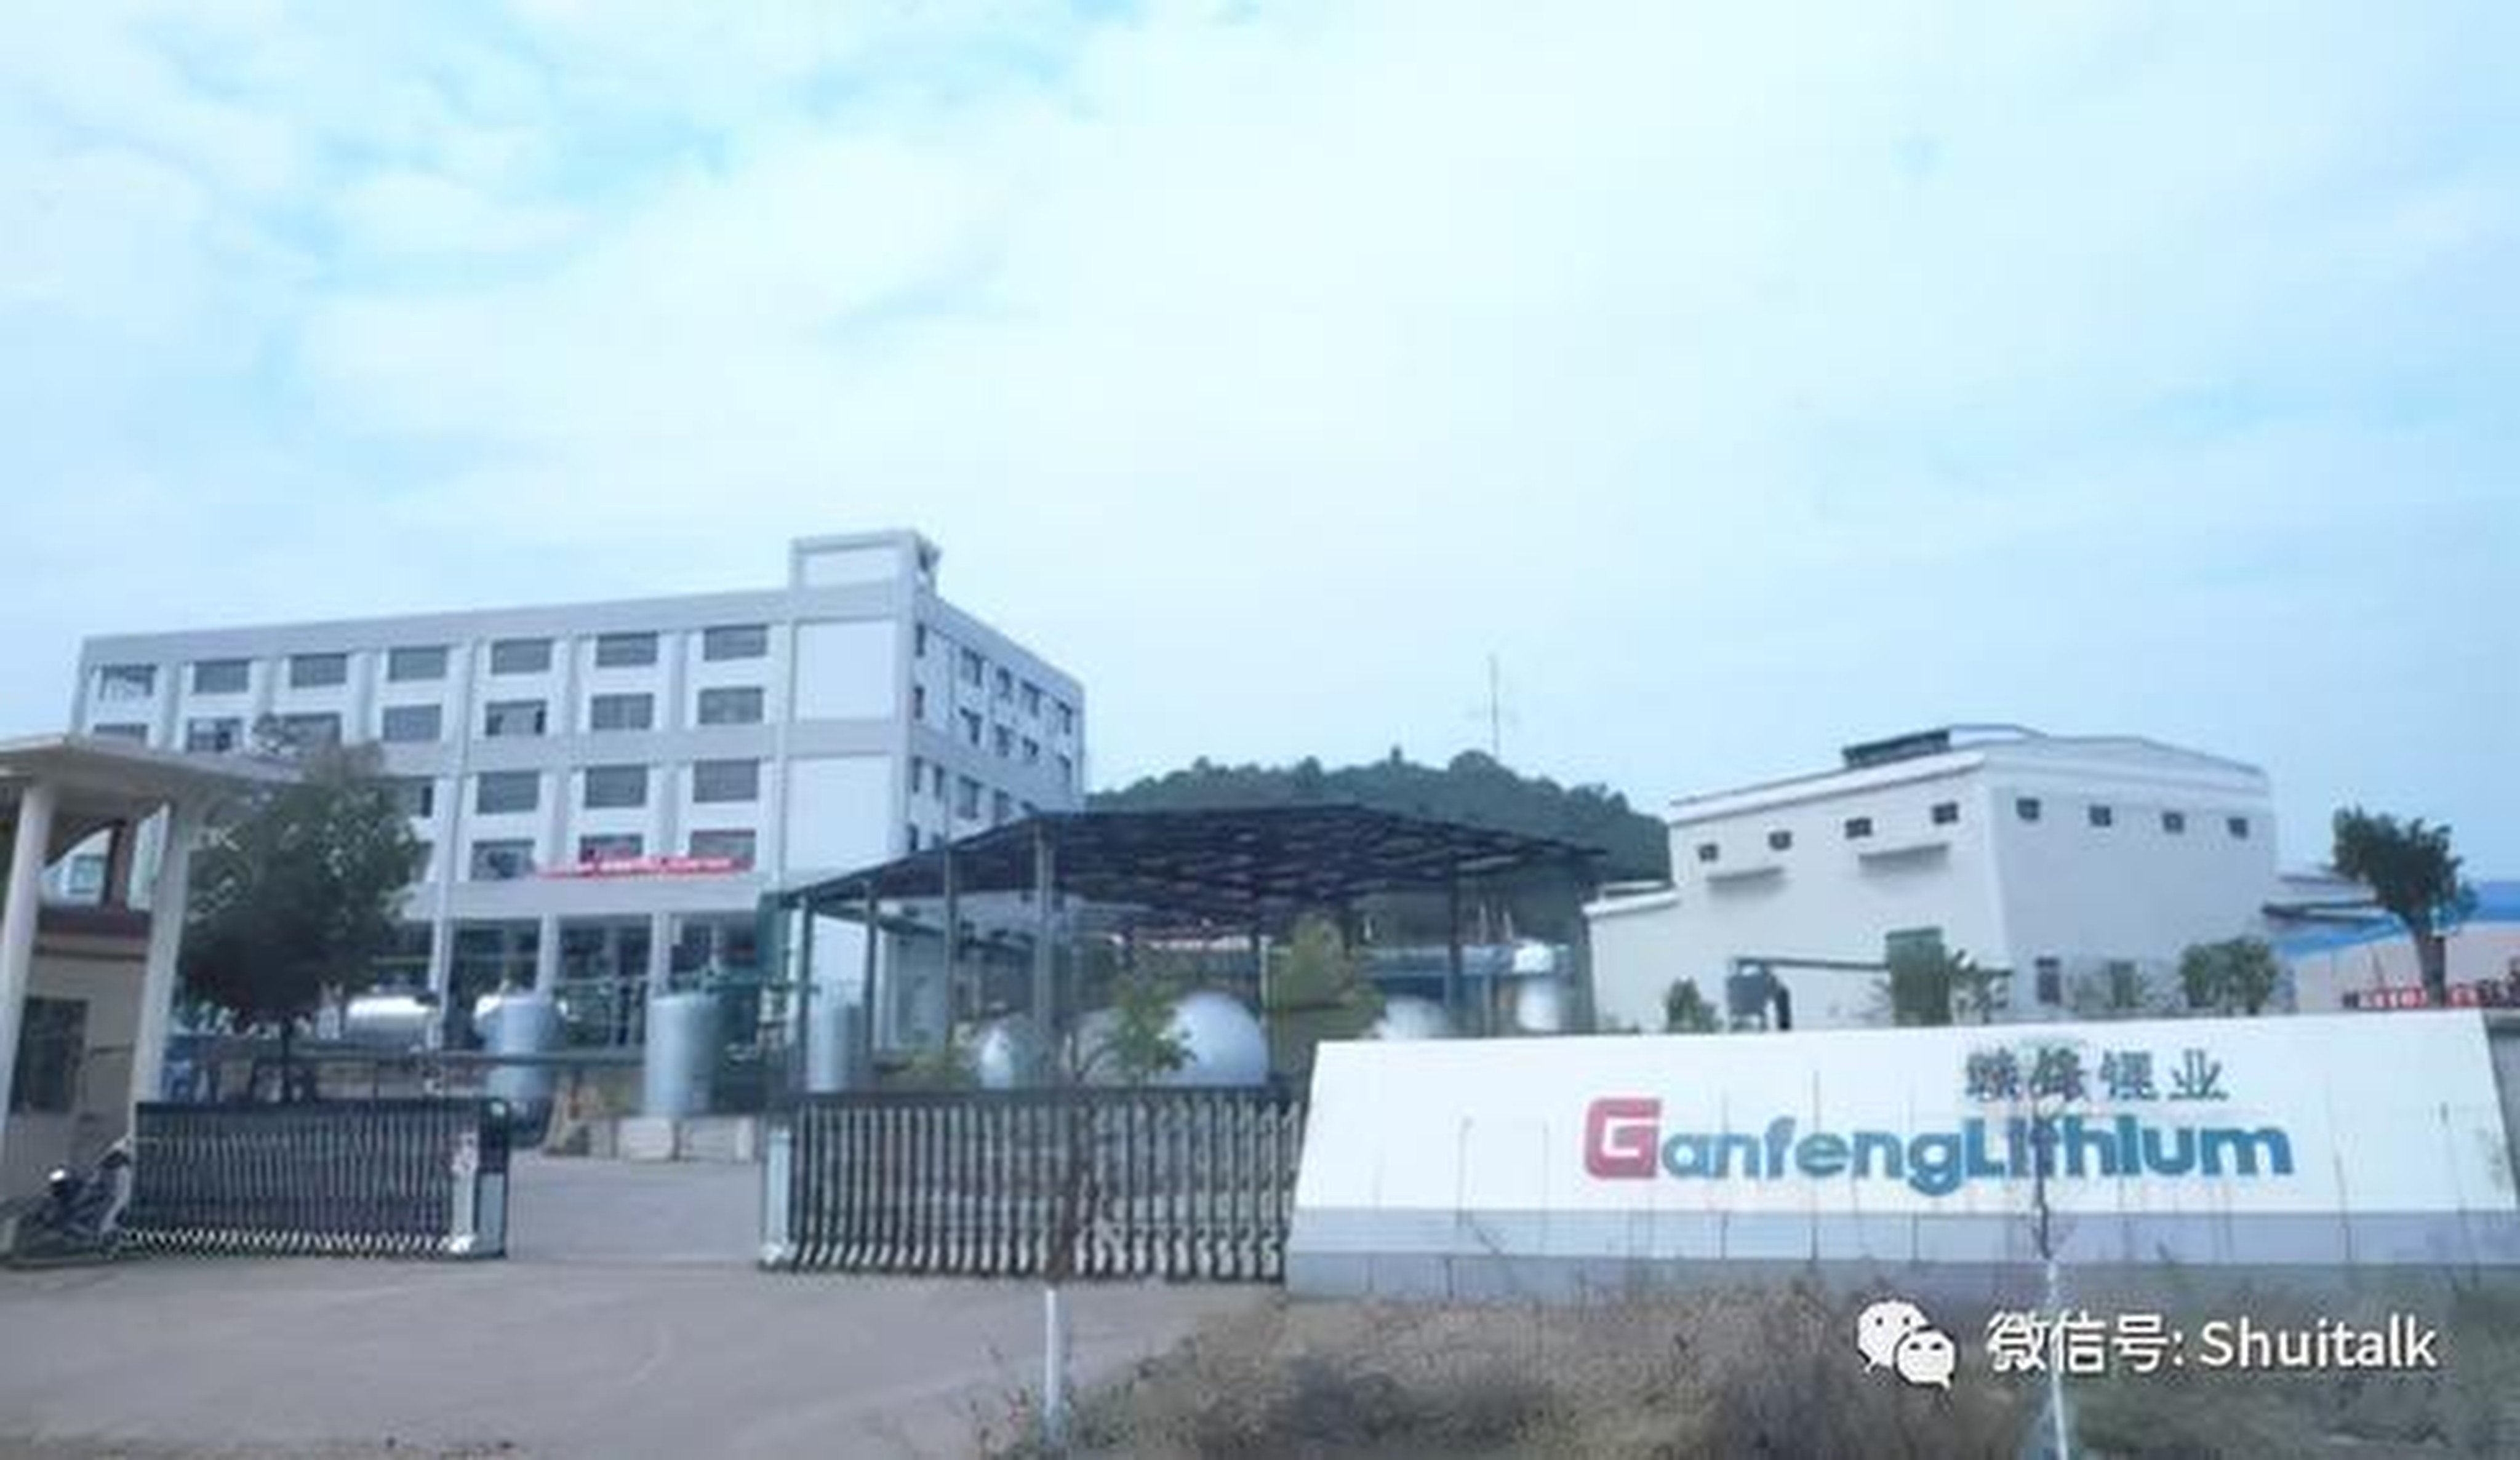 The planned battery projects will lift Ganfeng’s total annual battery capacity to around 100GWh, according to Daiwa Capital Markets. Photo: Weixin